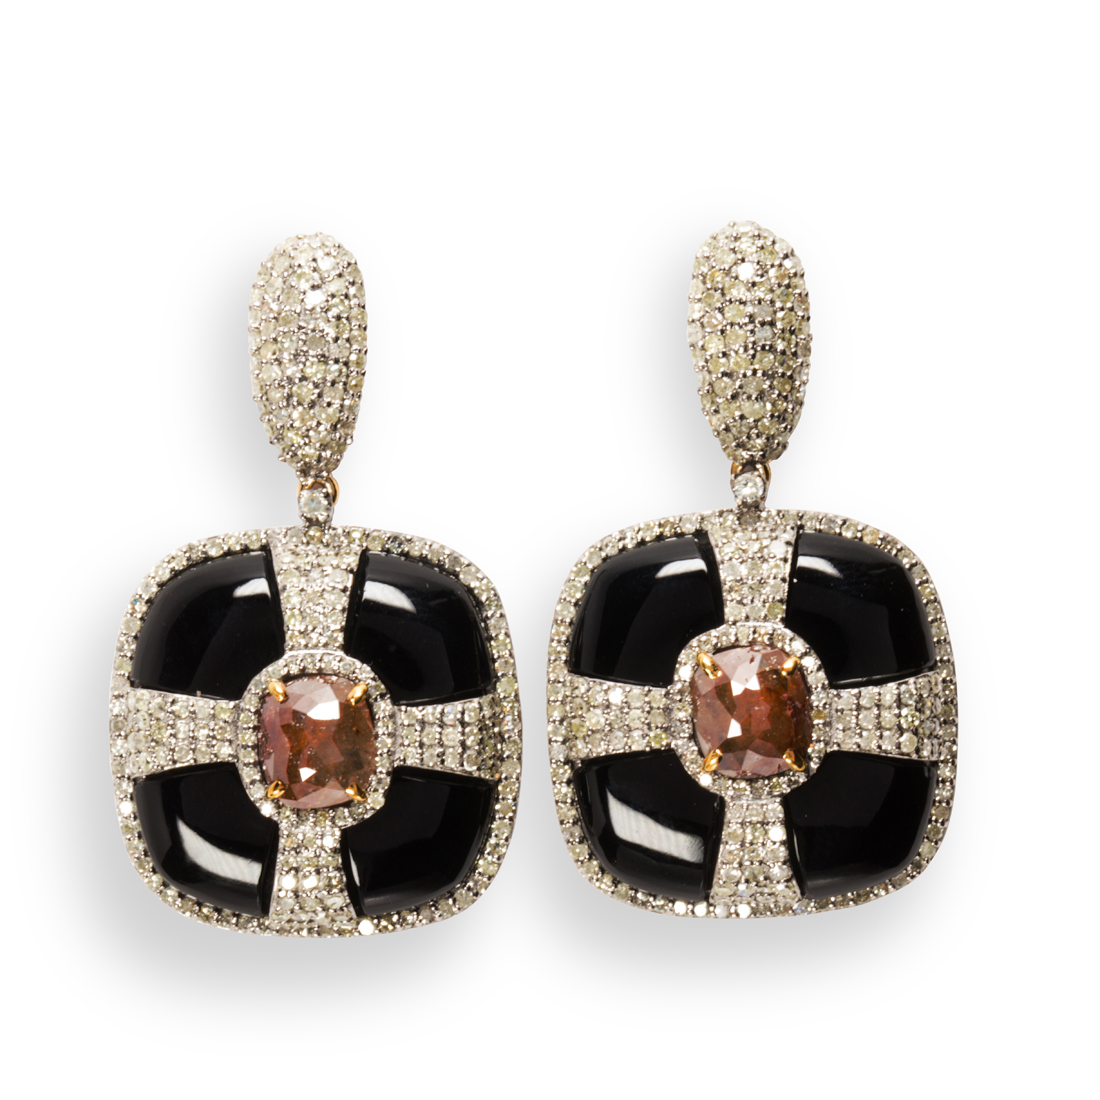 A PAIR OF BLACK CHALCEDONY COLORED 3a1f80